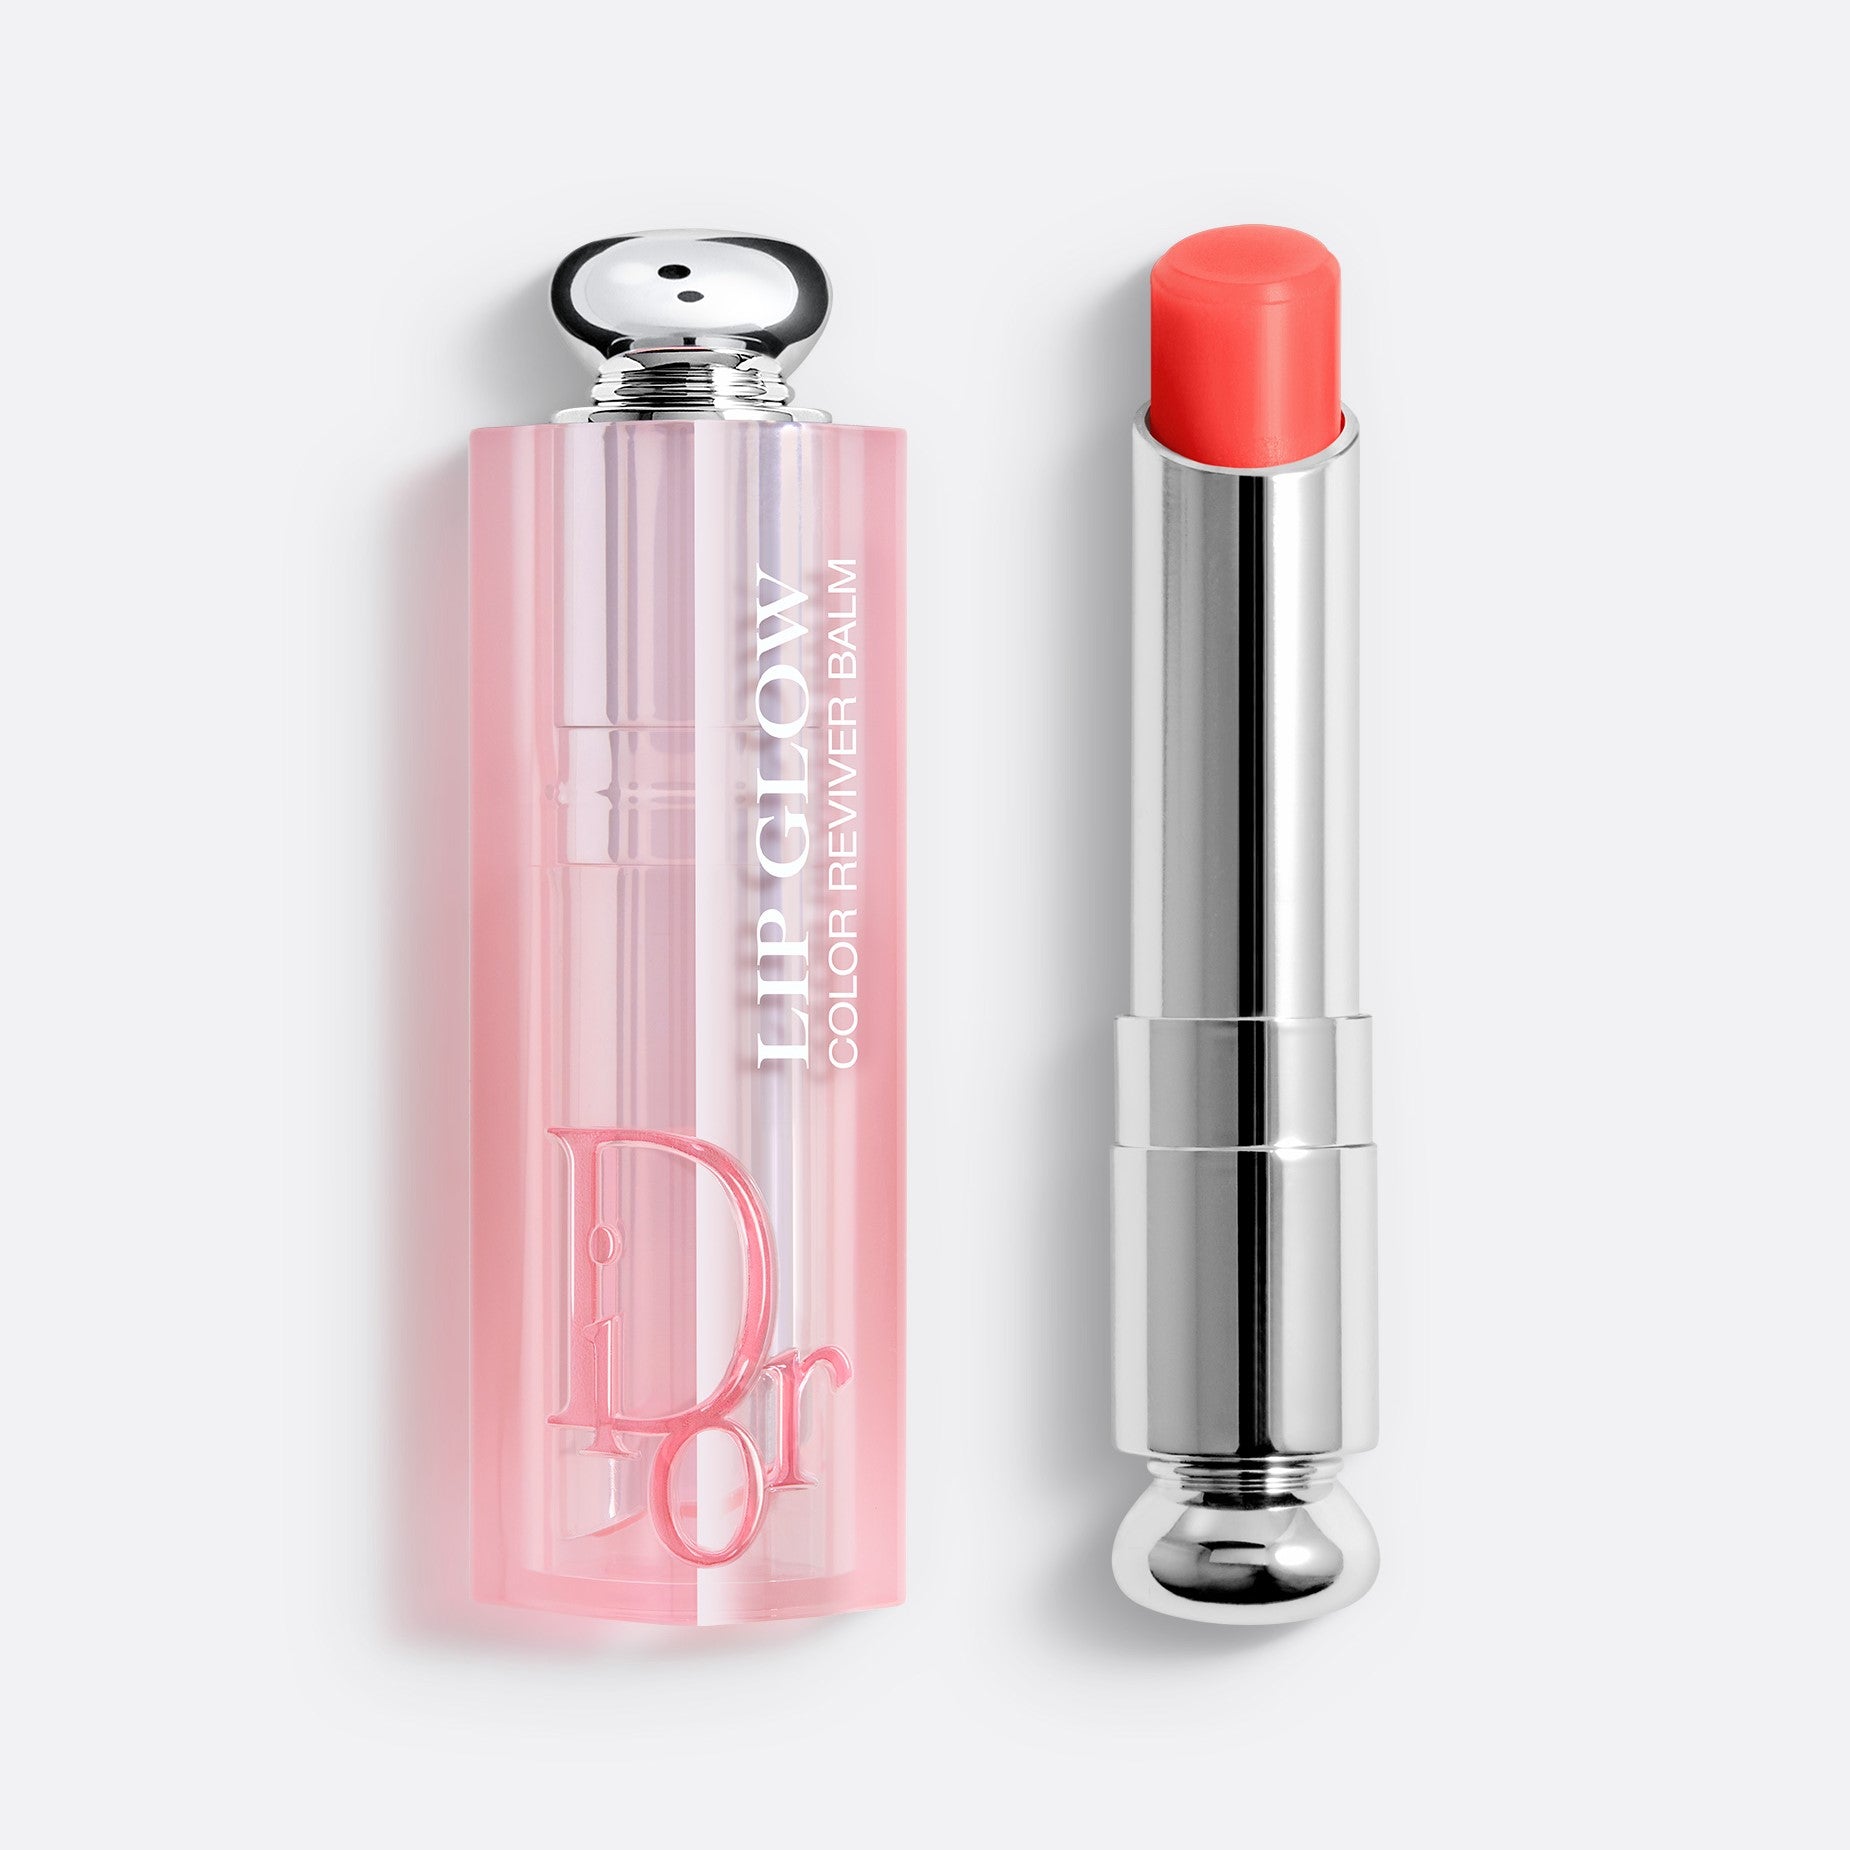 DIOR ADDICT LIP GLOW | Natural Glow Custom Colour Reviving Lip Balm - 24h* Hydration - 97%** Natural-Origin Ingredients - Limited Edition